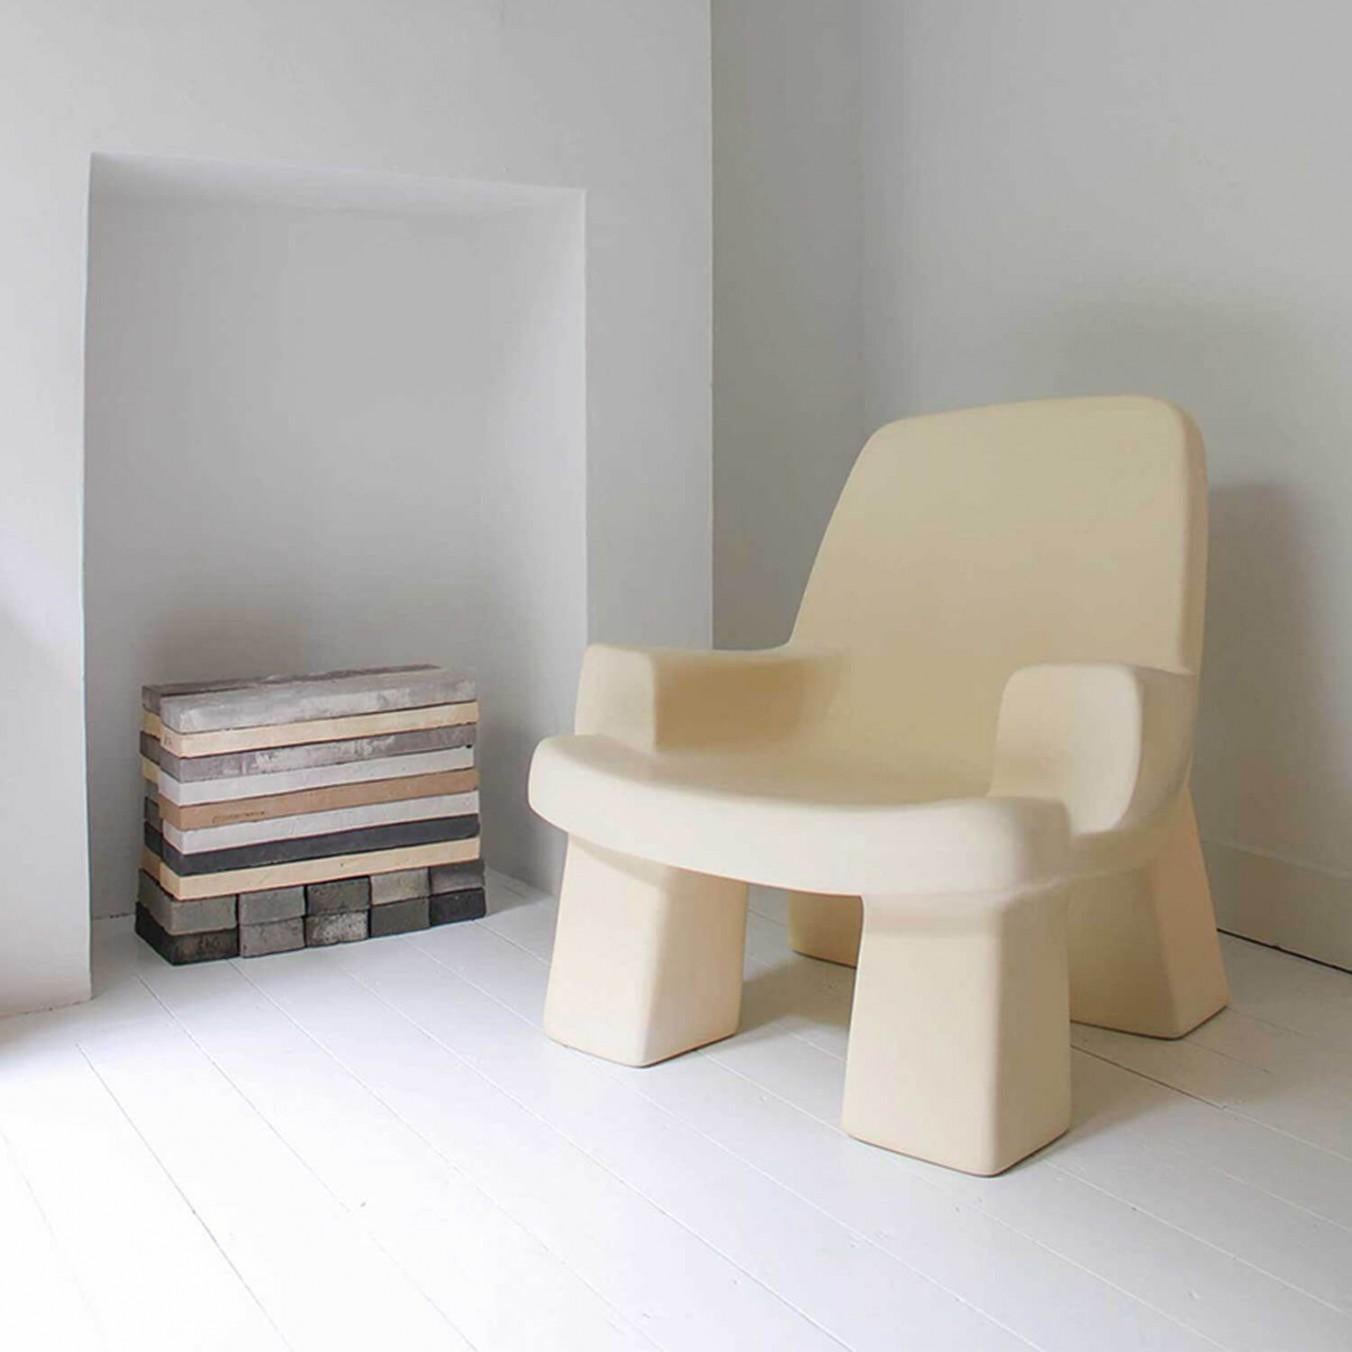 British Contemporary Fiberglass Armchair, Fudge Chair by Faye Toogood For Sale